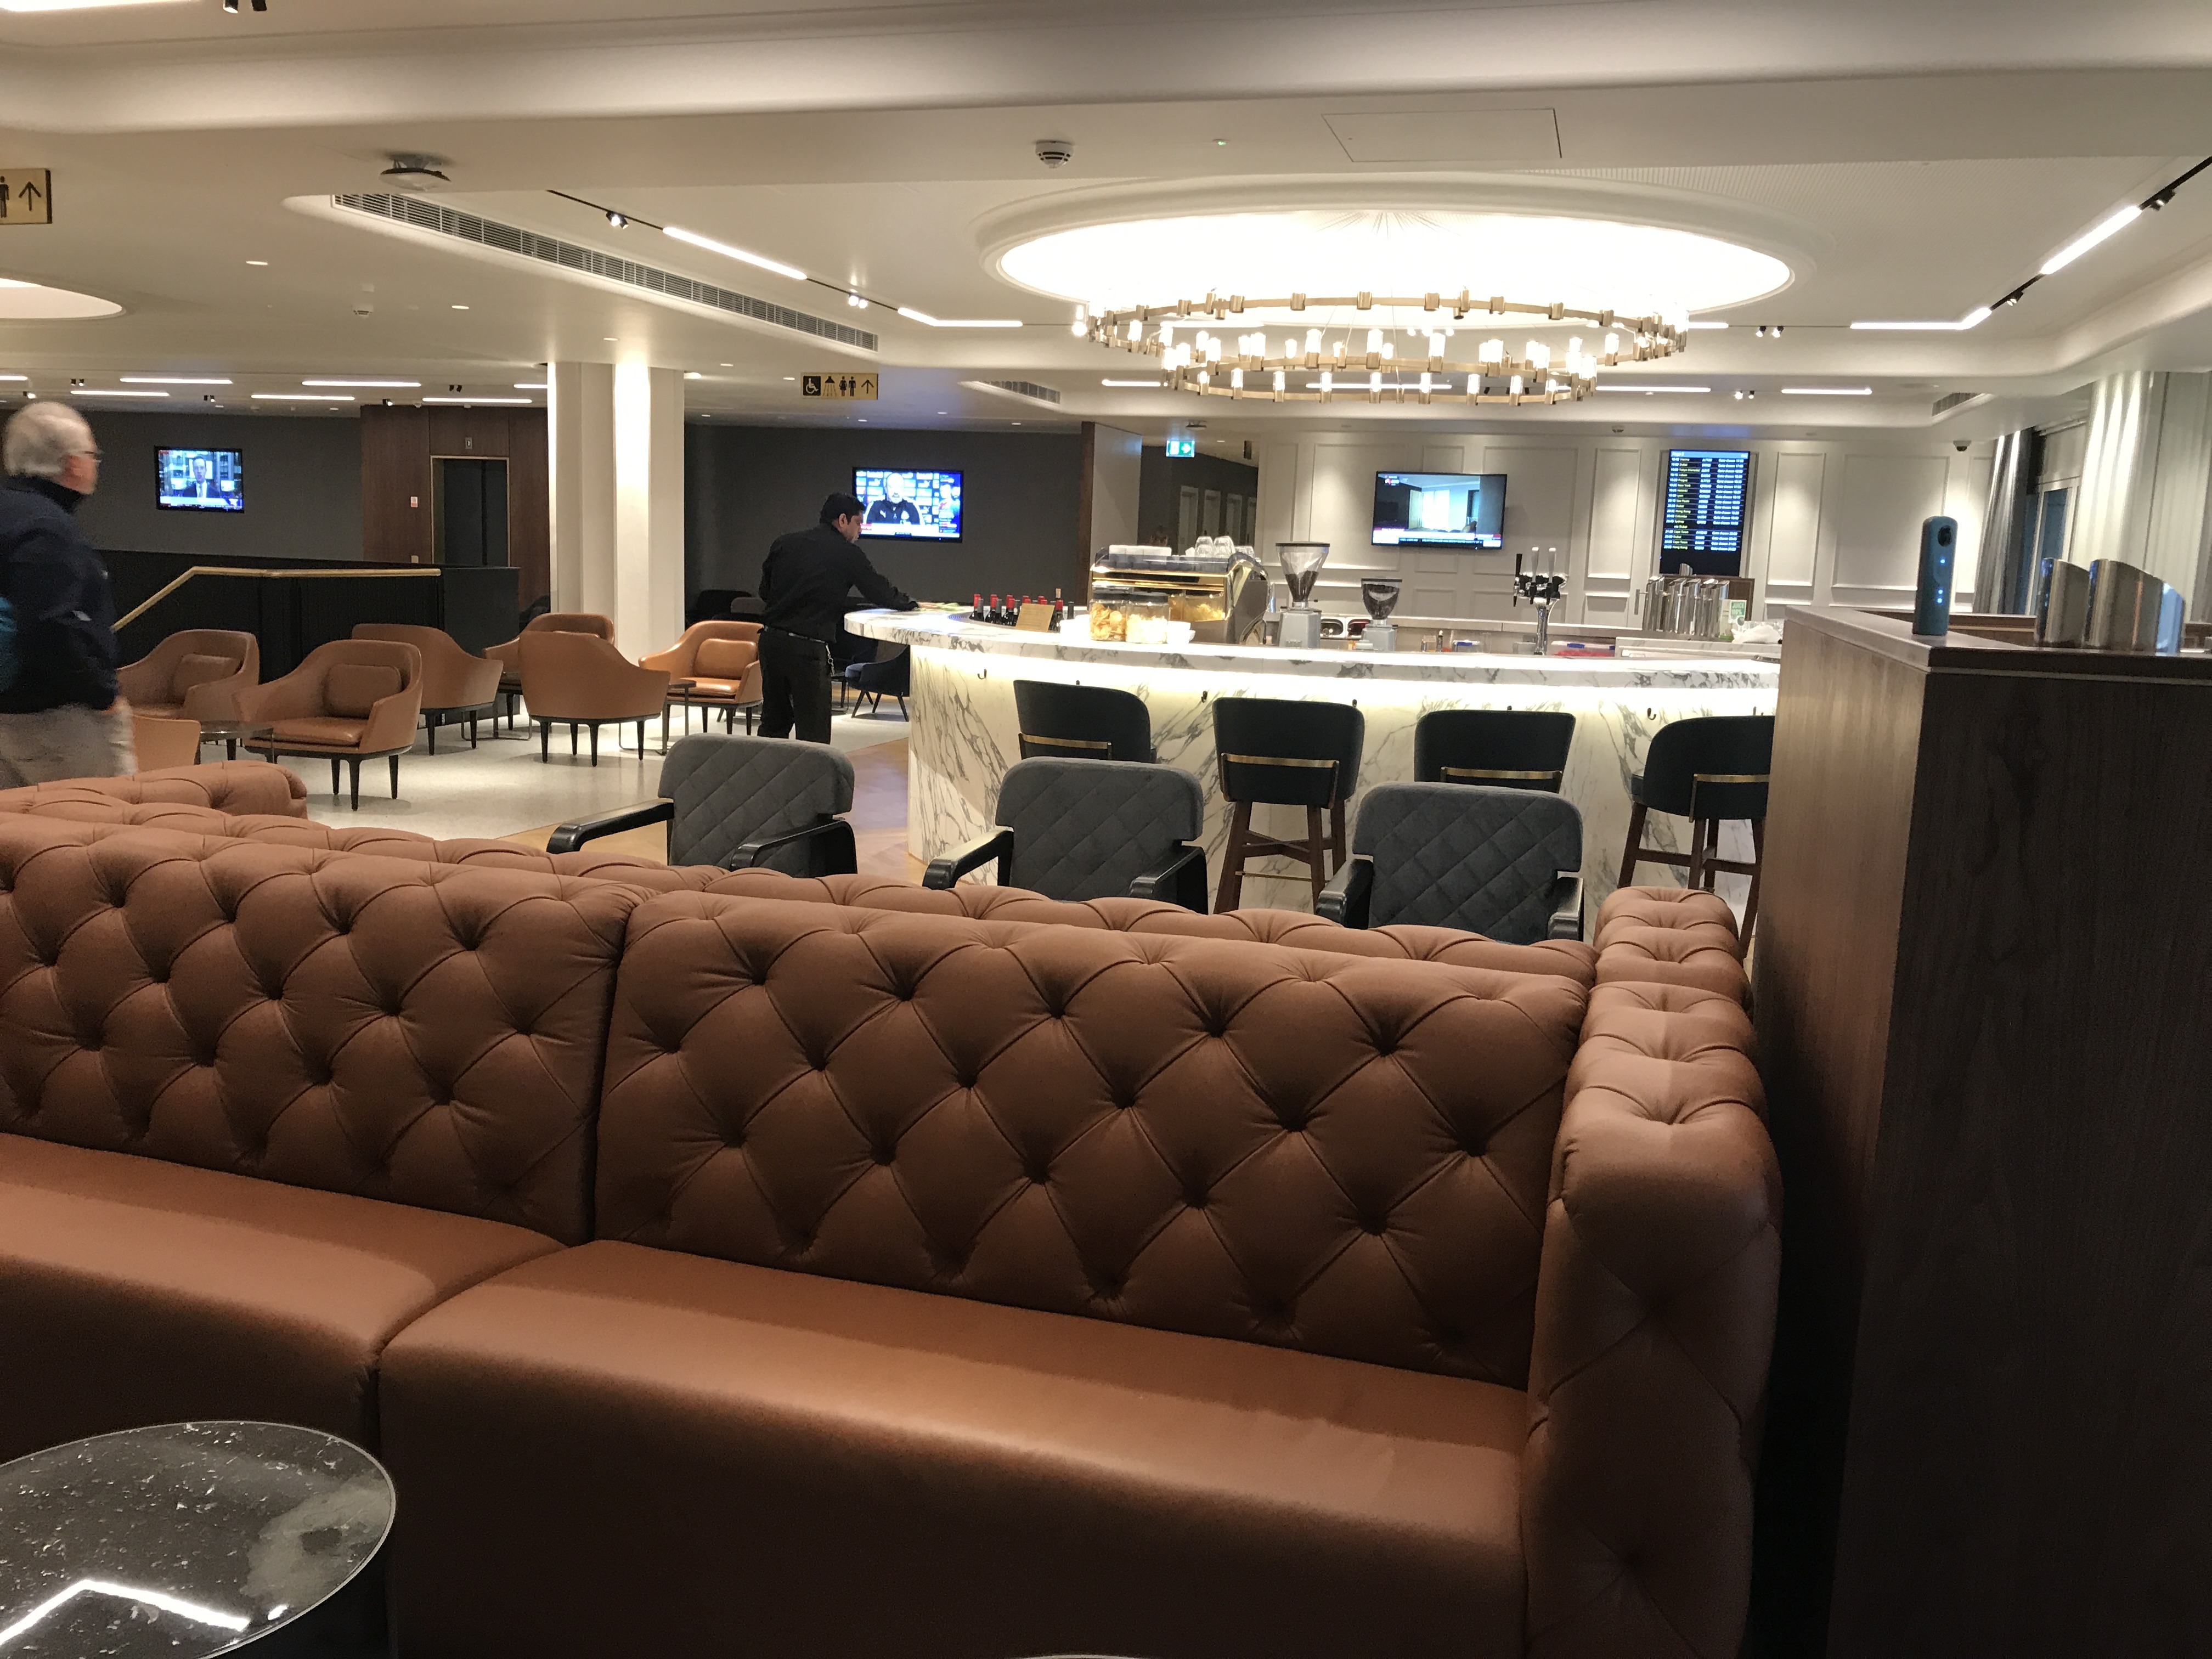 Qantas new business and first class lounge review heathrow T3